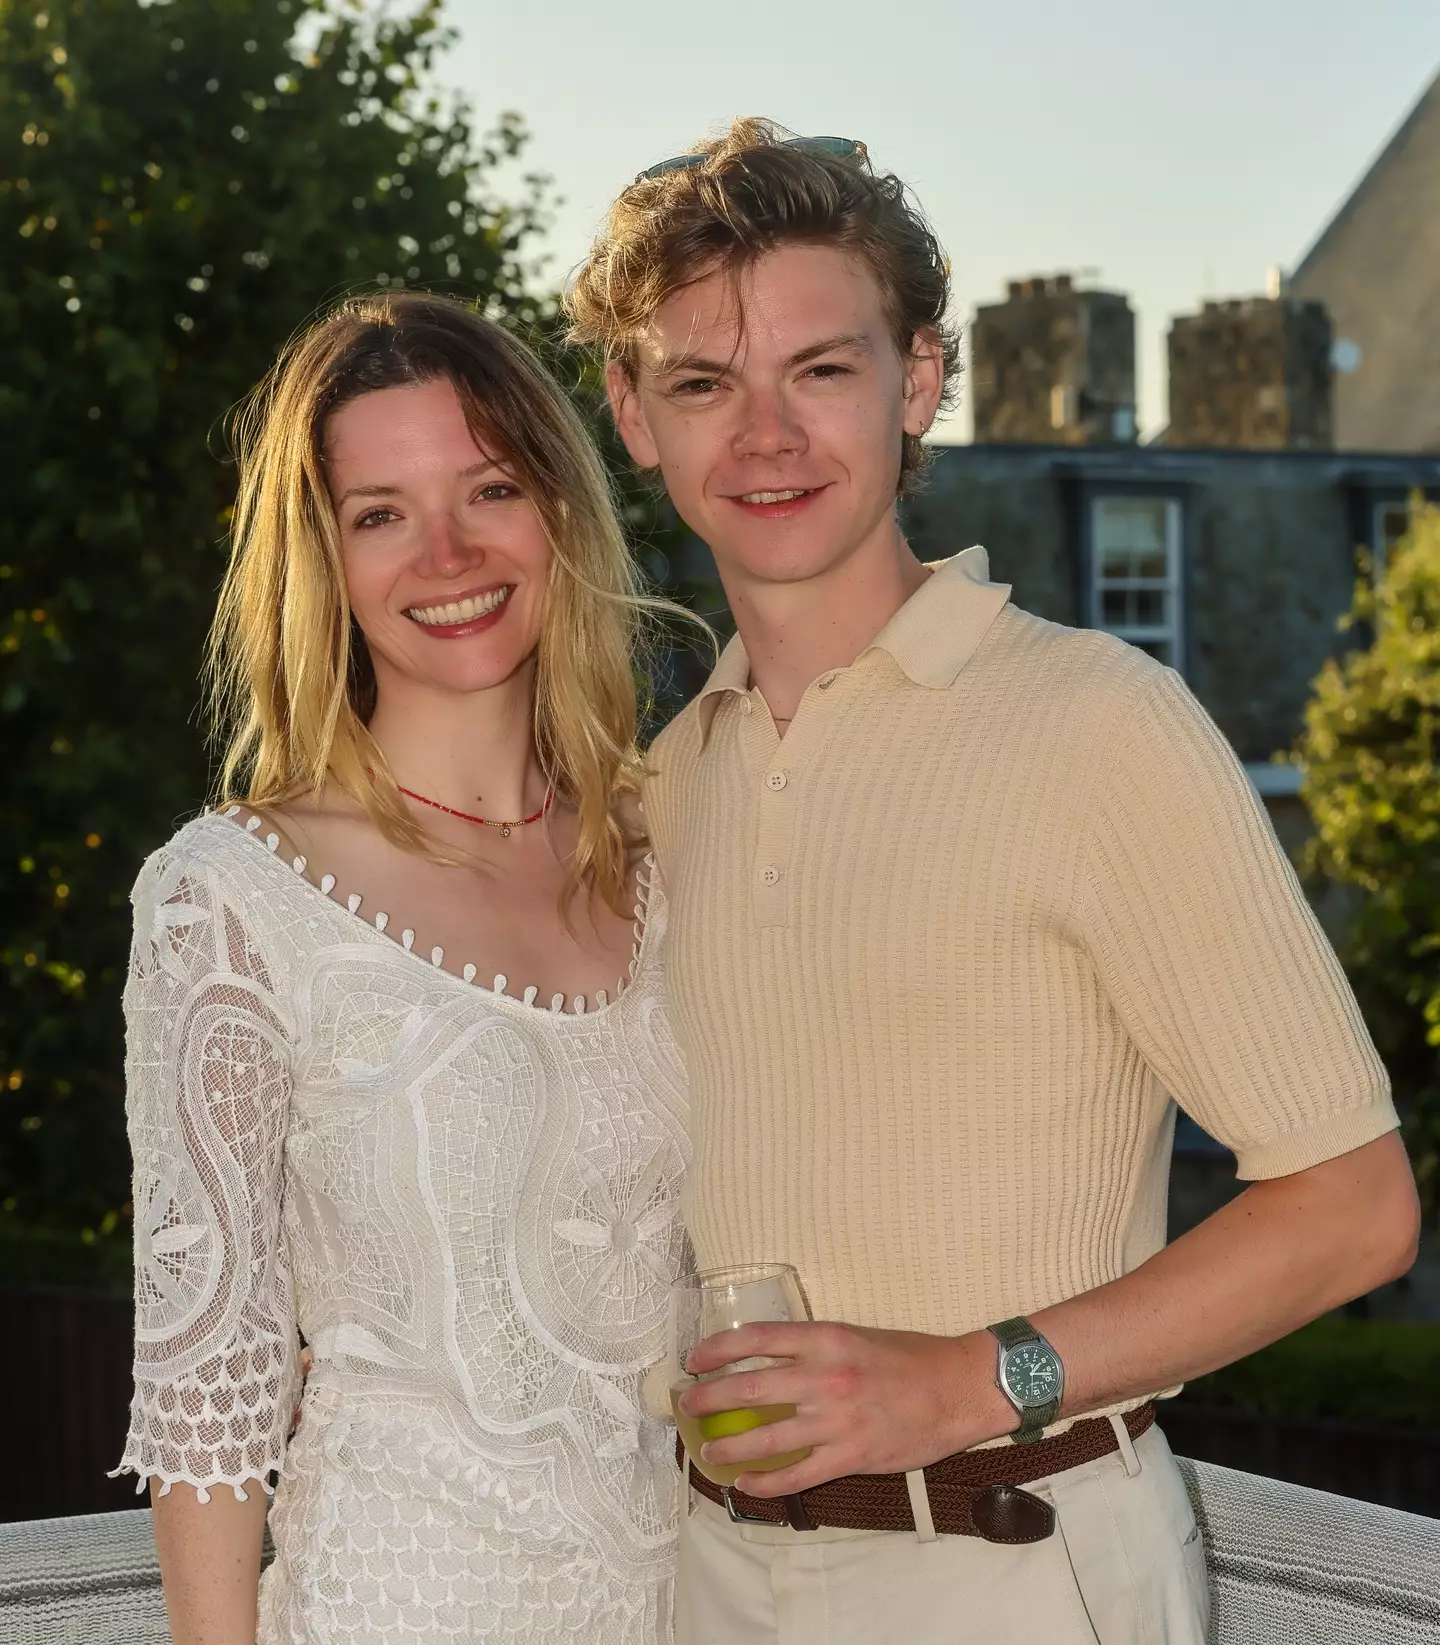 Thomas Brodie-Sangster and Talulah Riley are engaged.